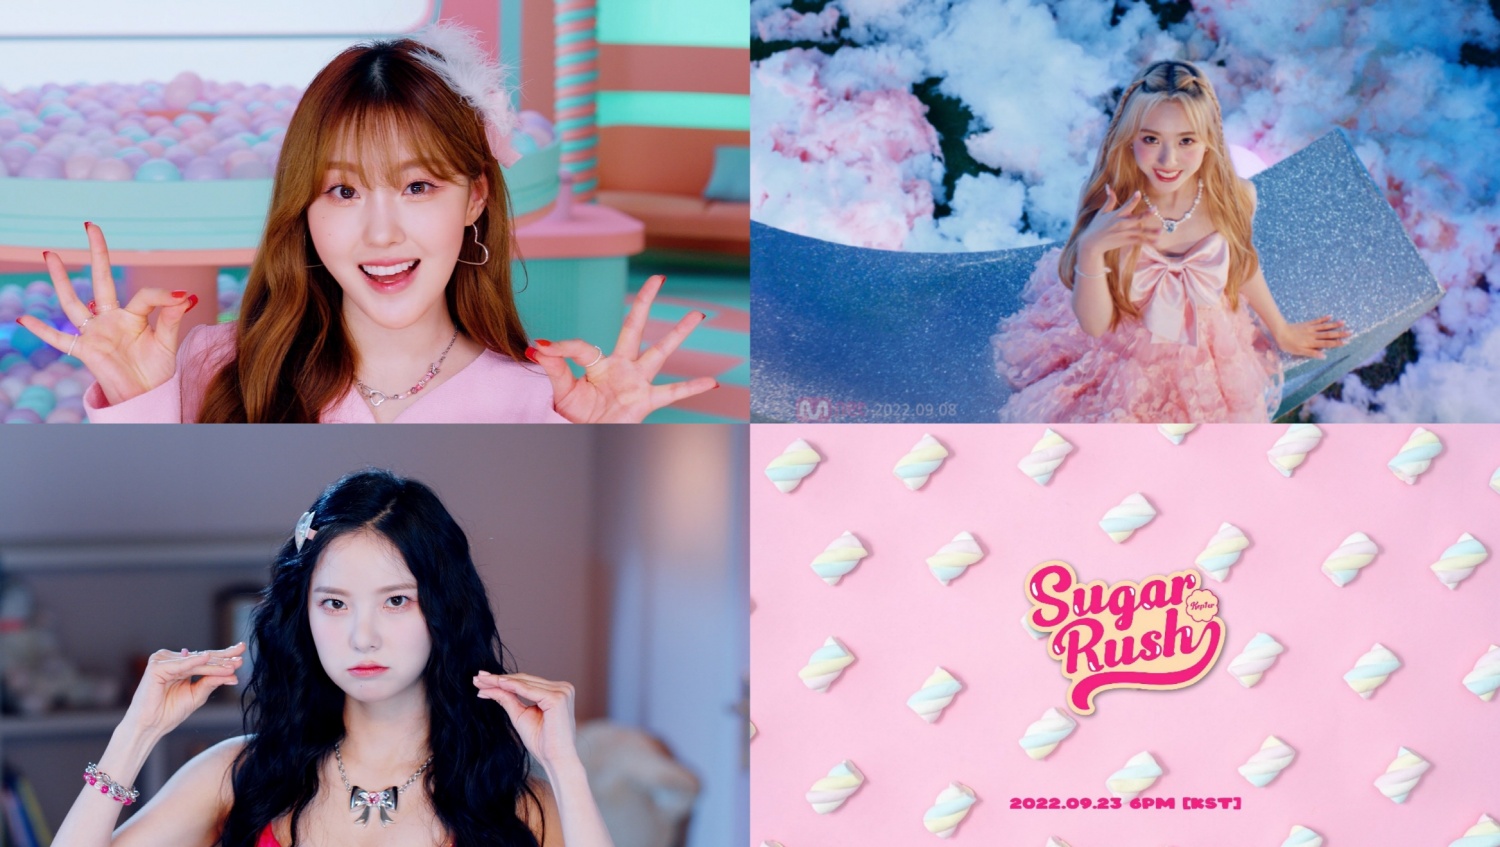 Kep1er releases the second trailer of the new Universe song “Sugar Rush” M / V!